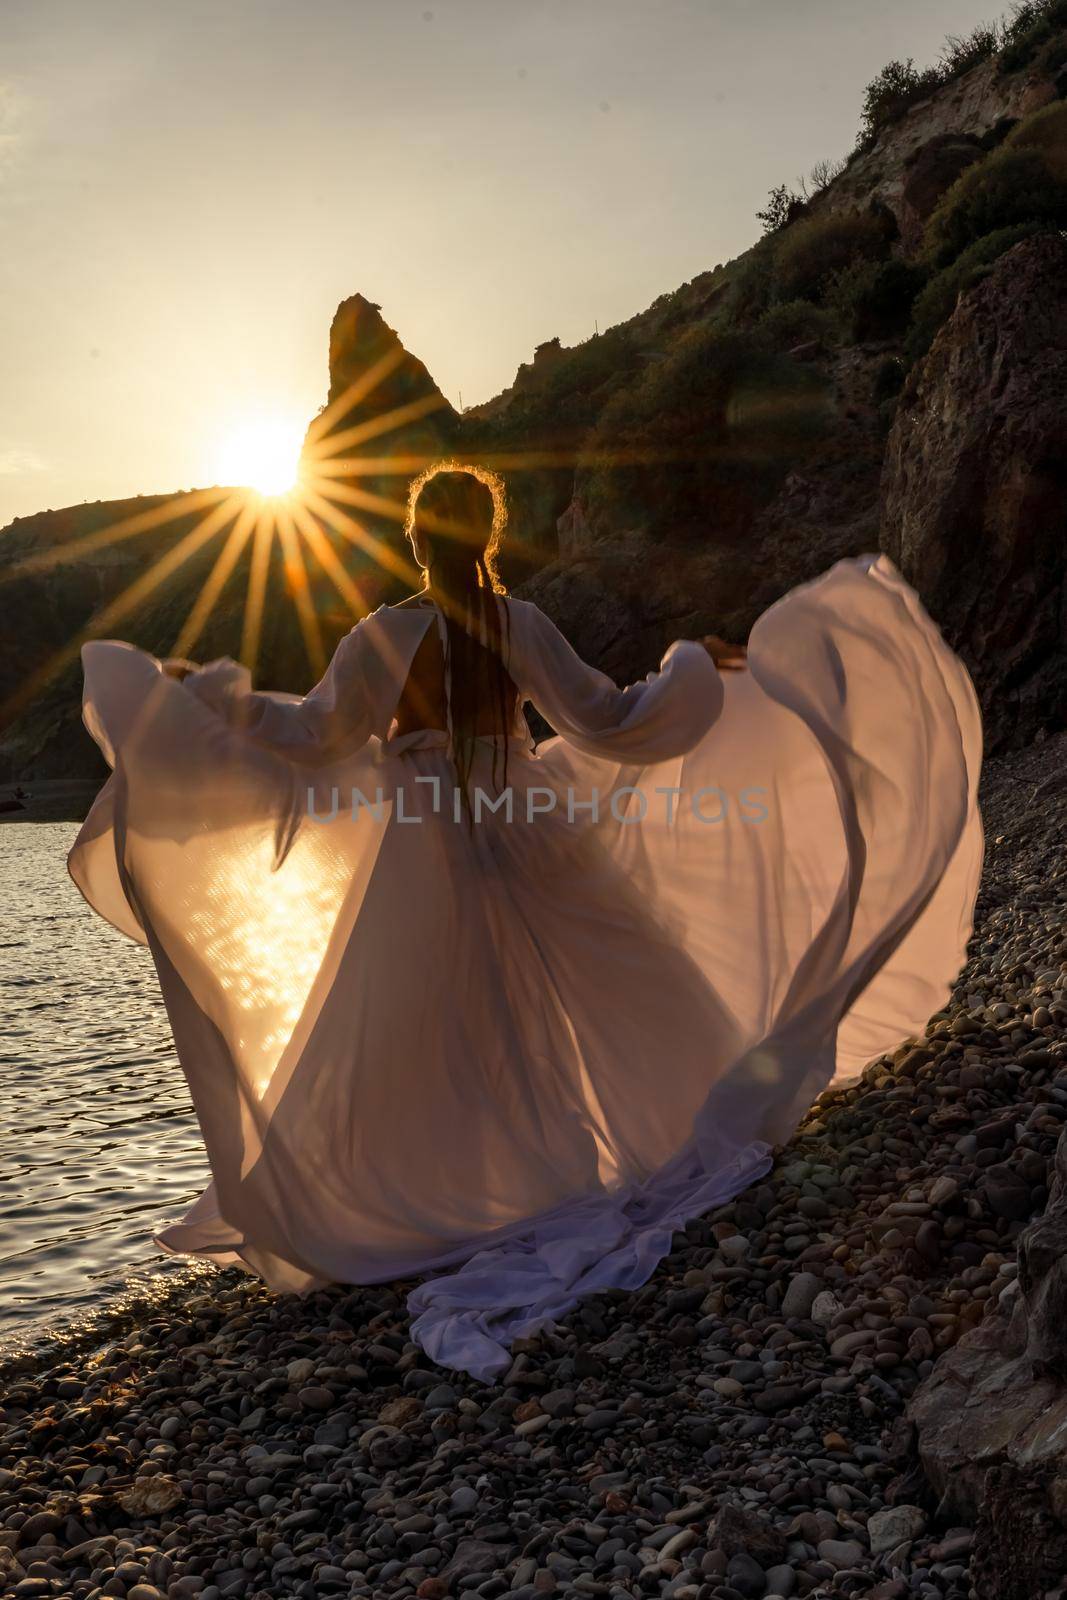 A mysterious female silhouette with long braids stands on the sea beach with mountain views, Sunset rays shine on a woman. Throws up a long white dress, a divine sunset. by Matiunina